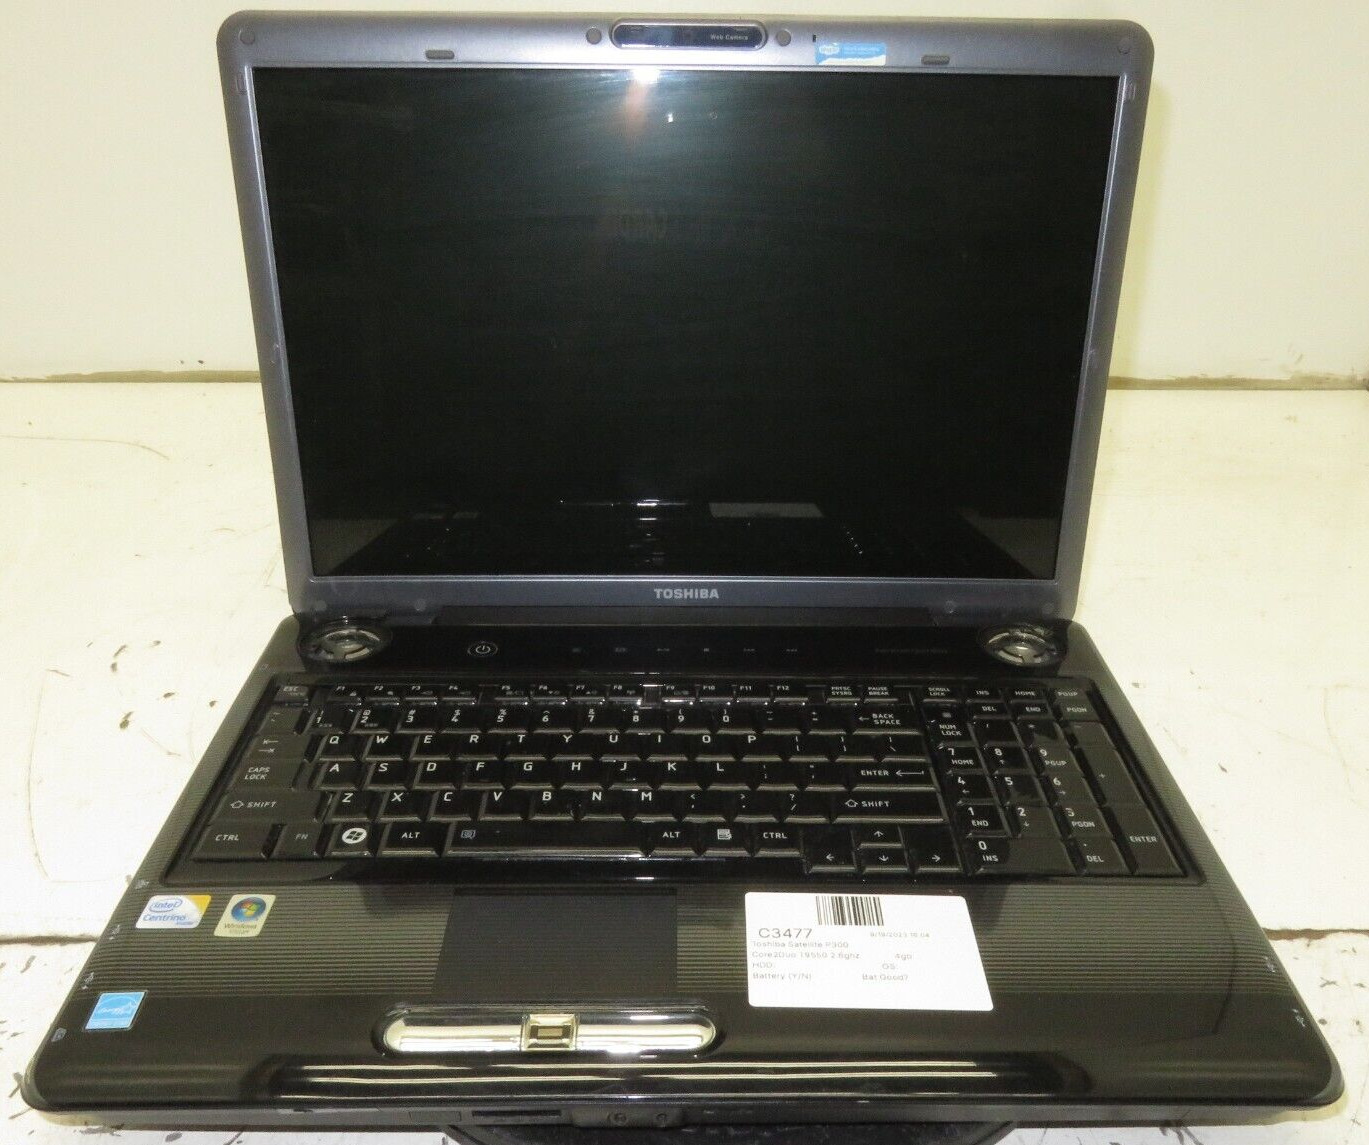 Toshiba Satellite P300 Laptop Intel Core 2 Duo T9550 4GB Ram No HDD or Battery